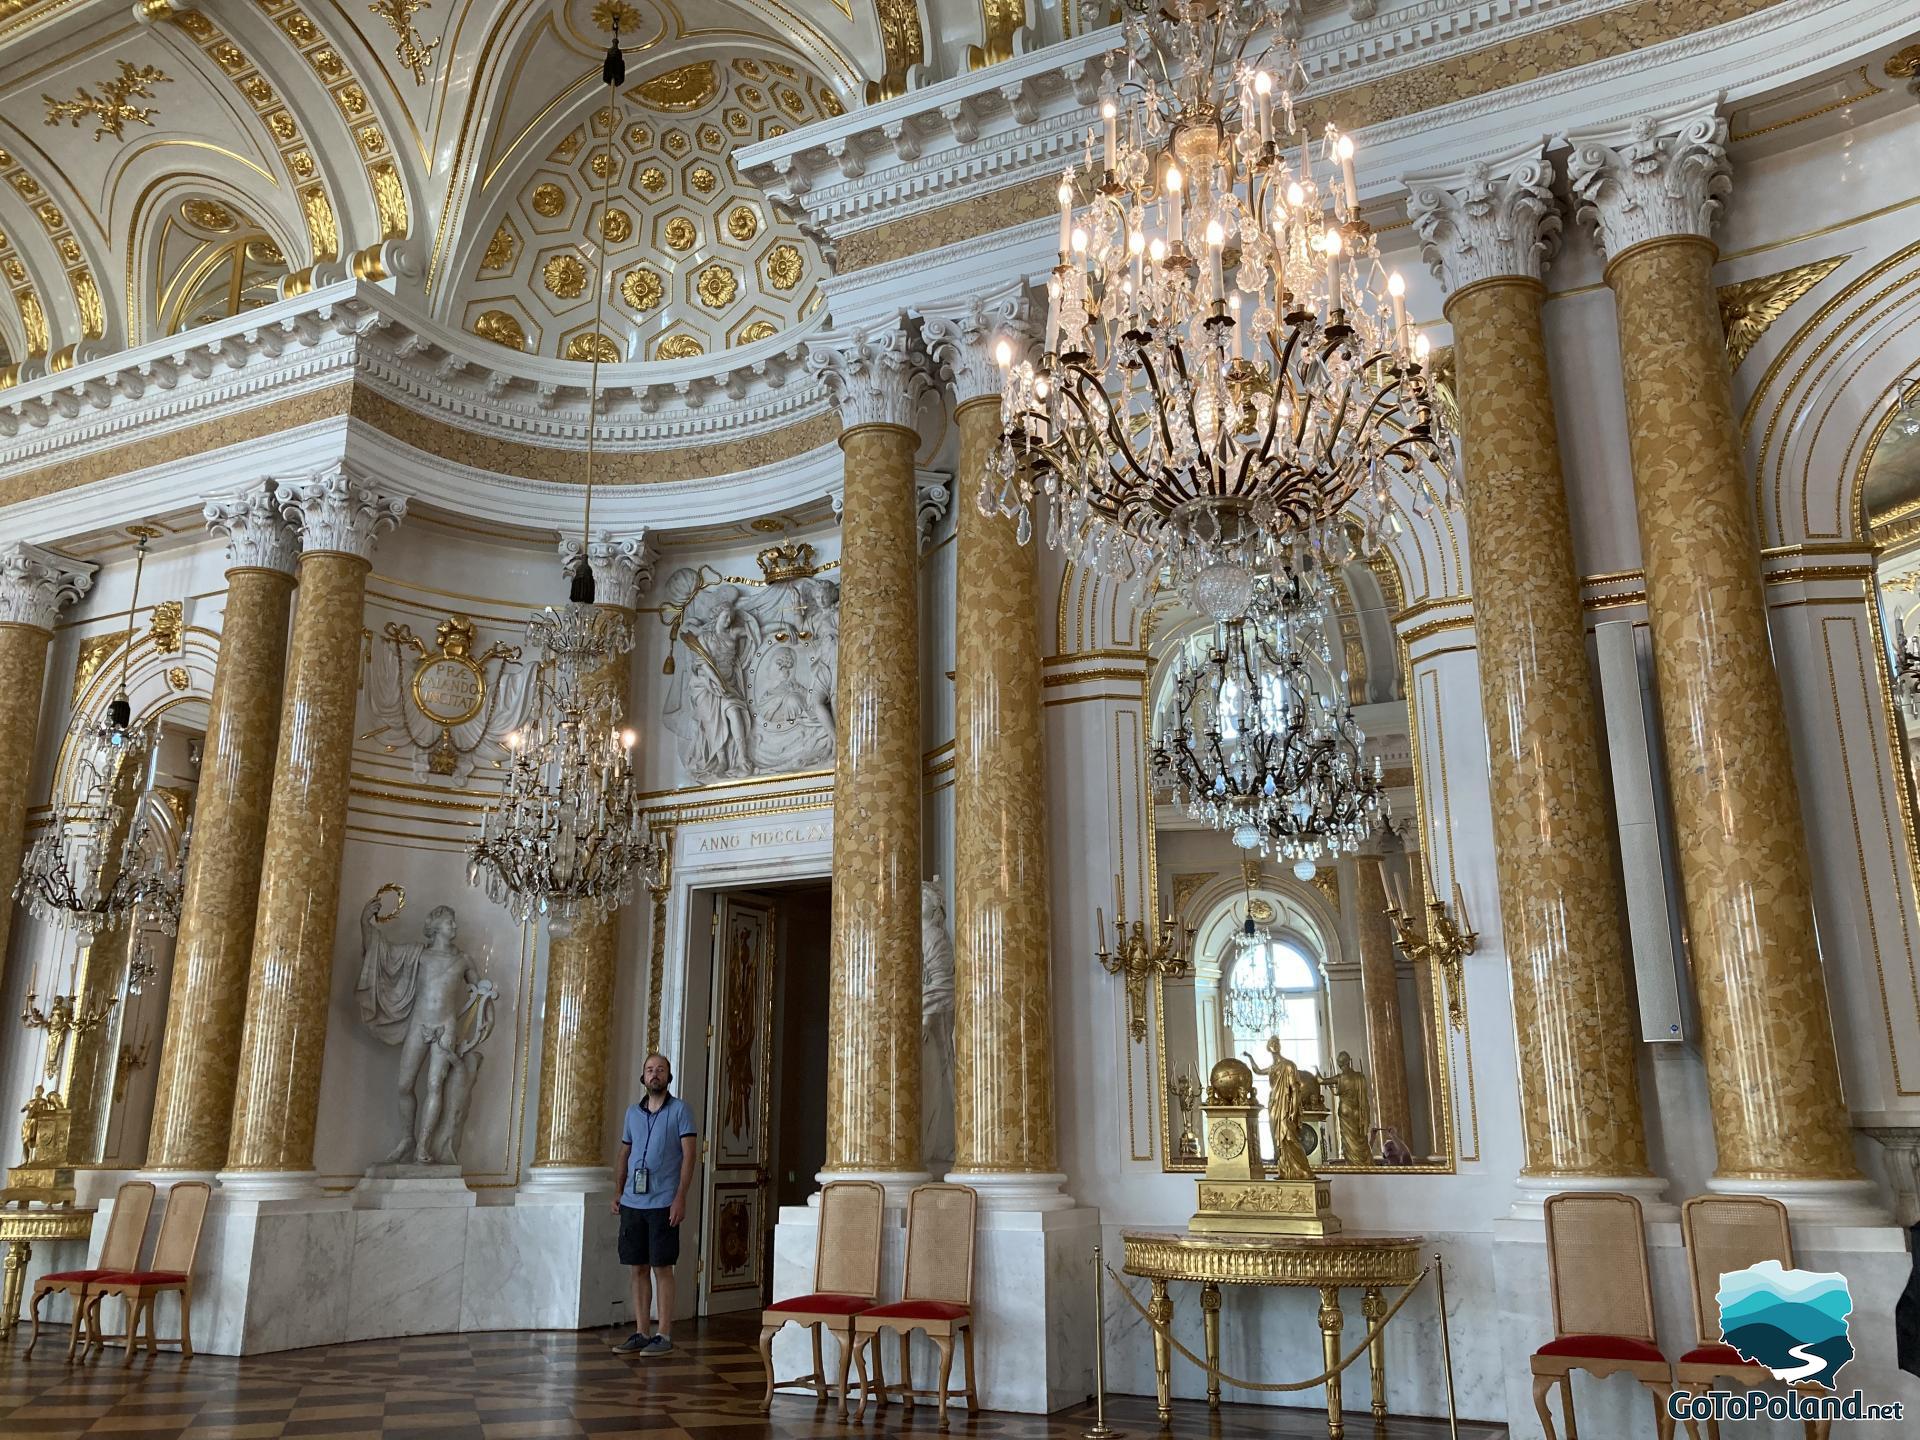 a ceremonial ballroom in the castle, a checkerboard floor, crystal chandeliers, yellow columns with Corinthian capitals, Roman style sculptures, big mirror, golden table under the mirror